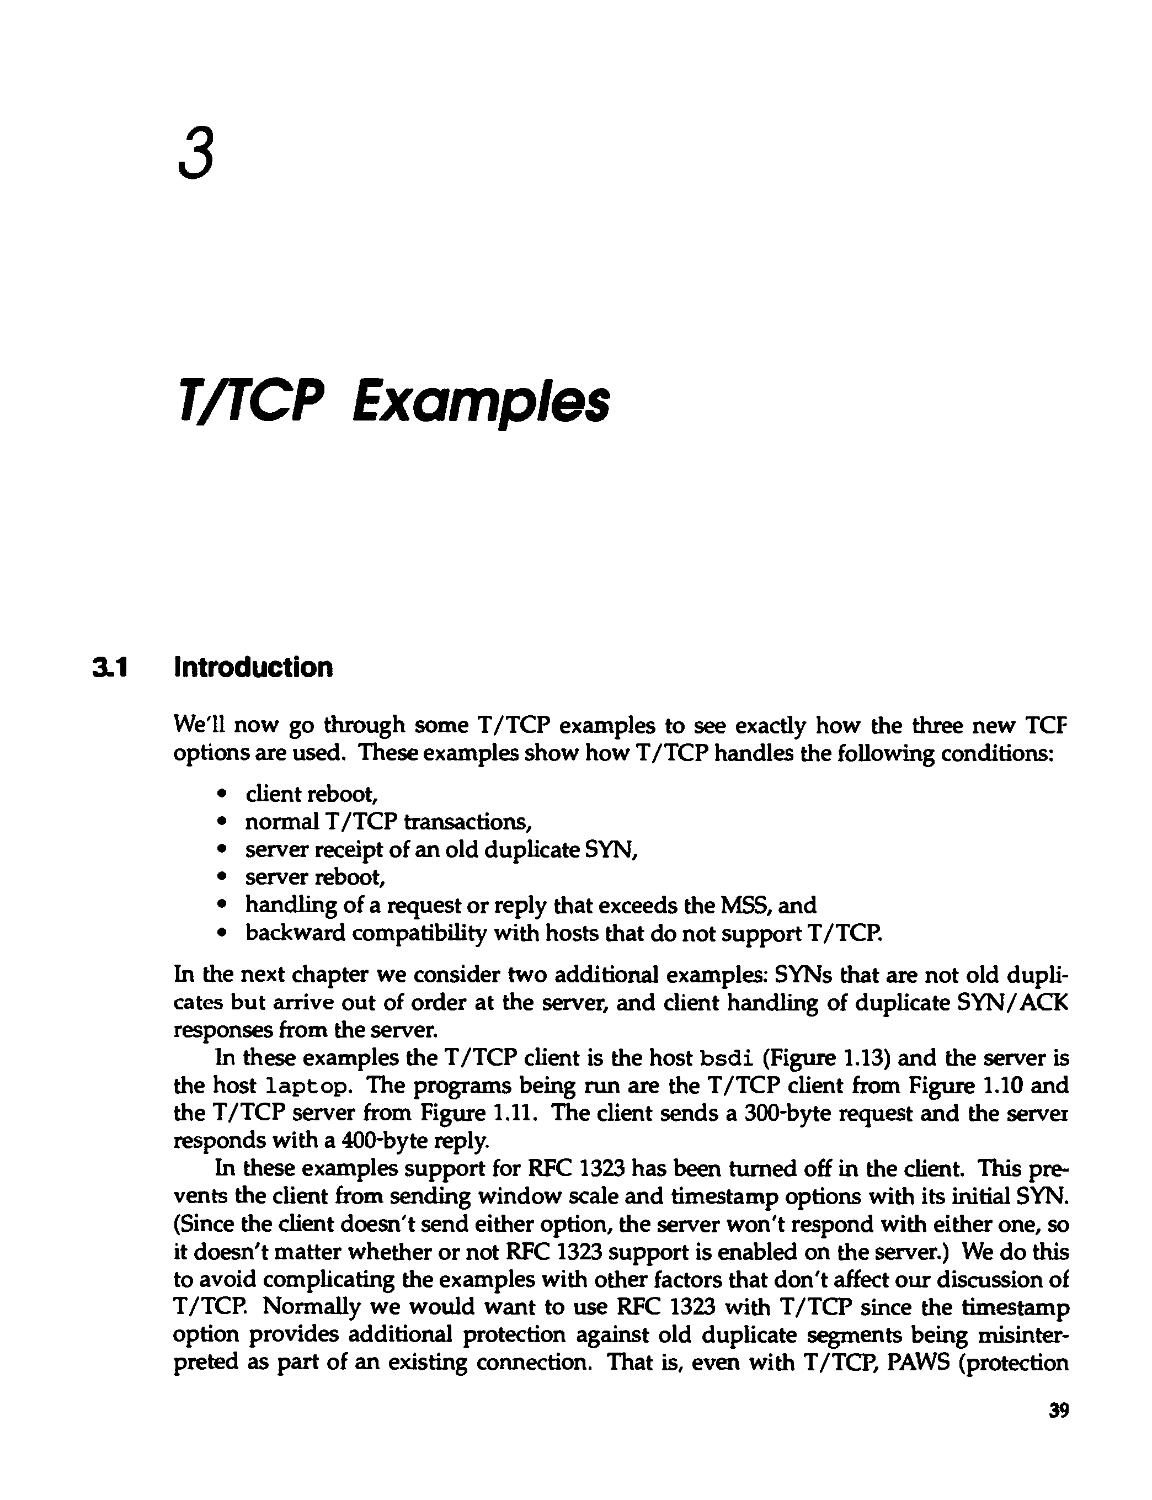 Chapter 3. T/TCP Examples